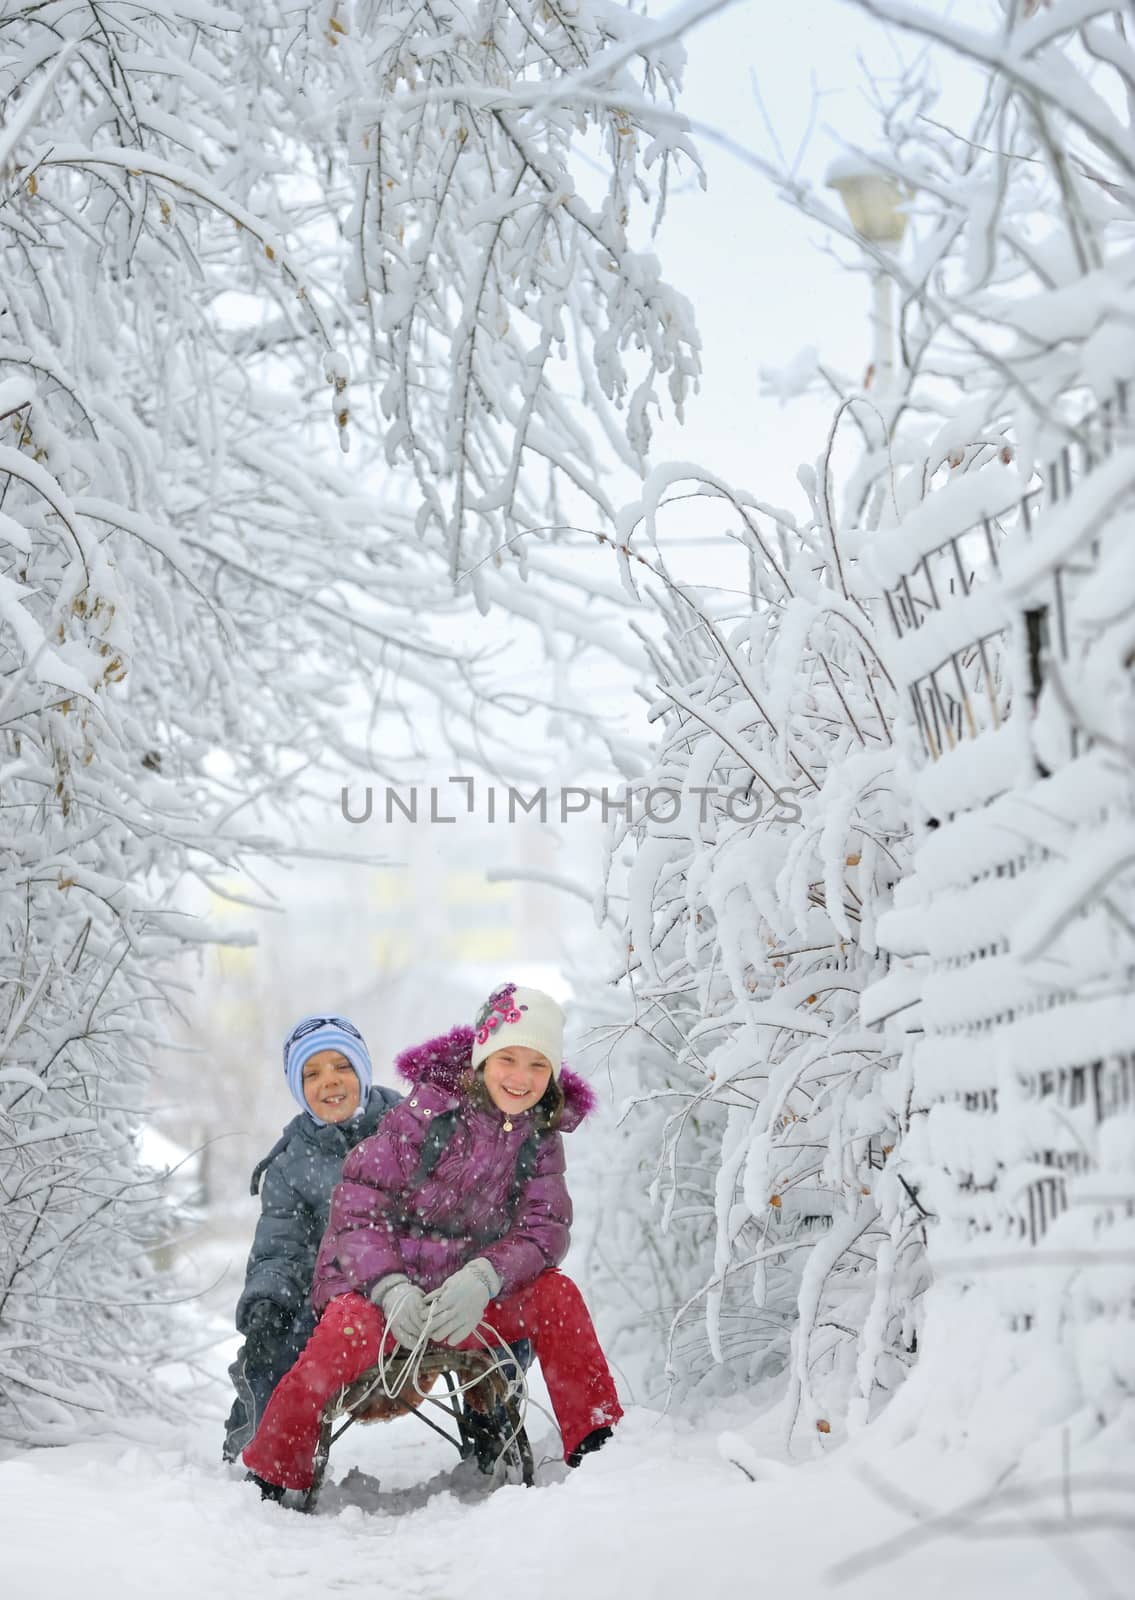 Boy And Girl at sledging Through Snowy in a fairytale landscape